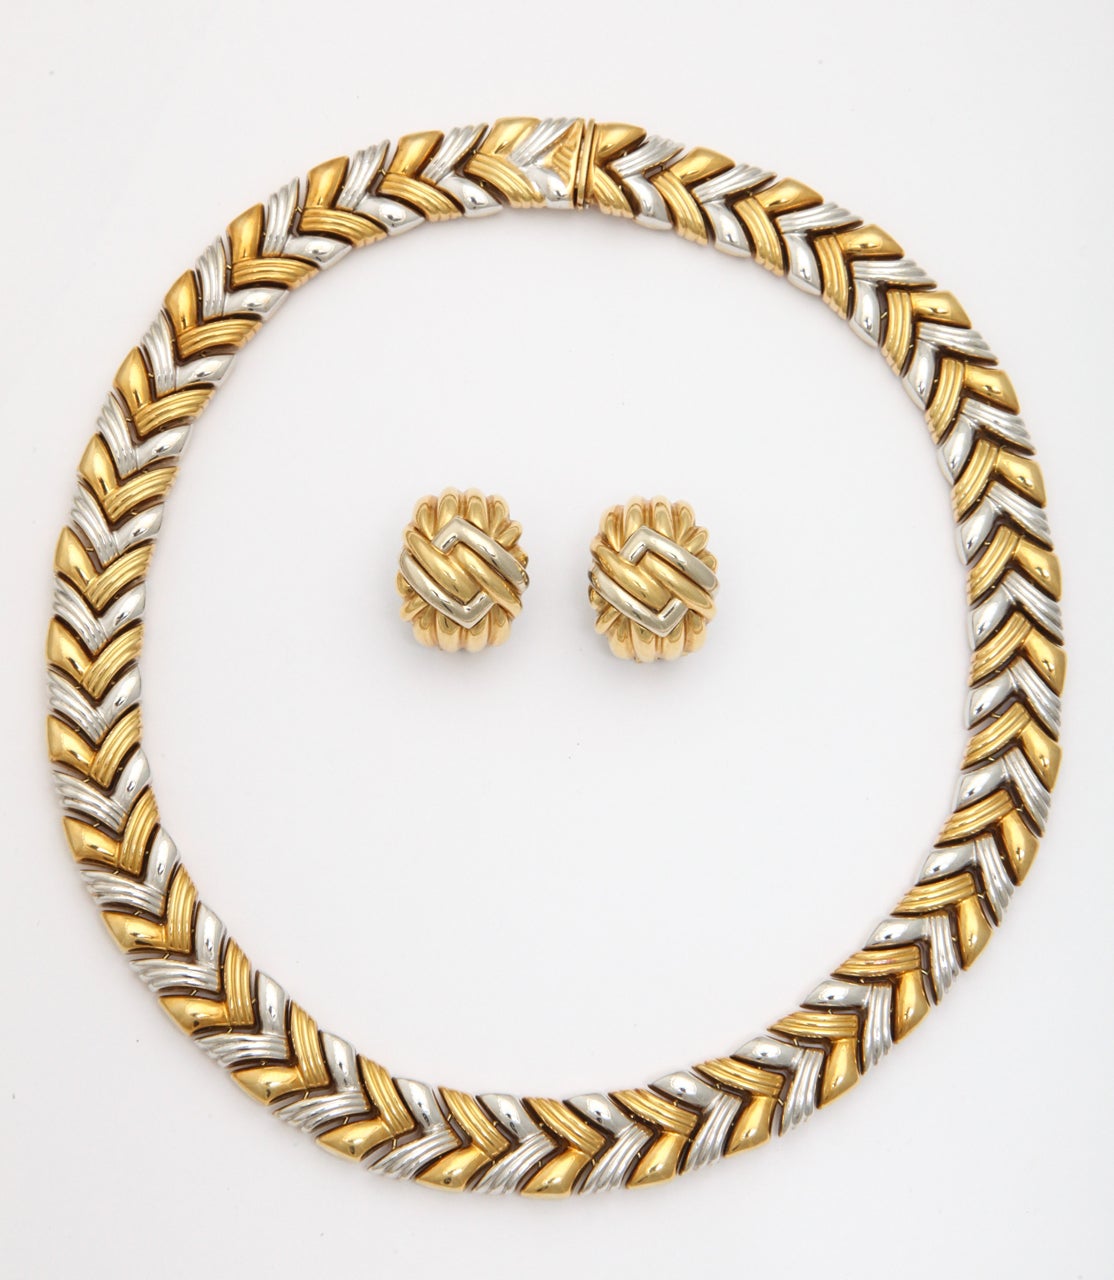 Very unusual chevron shaped 18kt Yellow Gold necklace reversing to solid 18kt Yellow Gold chevron shaped Necklace.  Extremely versatile.   Marked 750 & bearing Italian control marks. Matching Earrings with Omega Backs available.